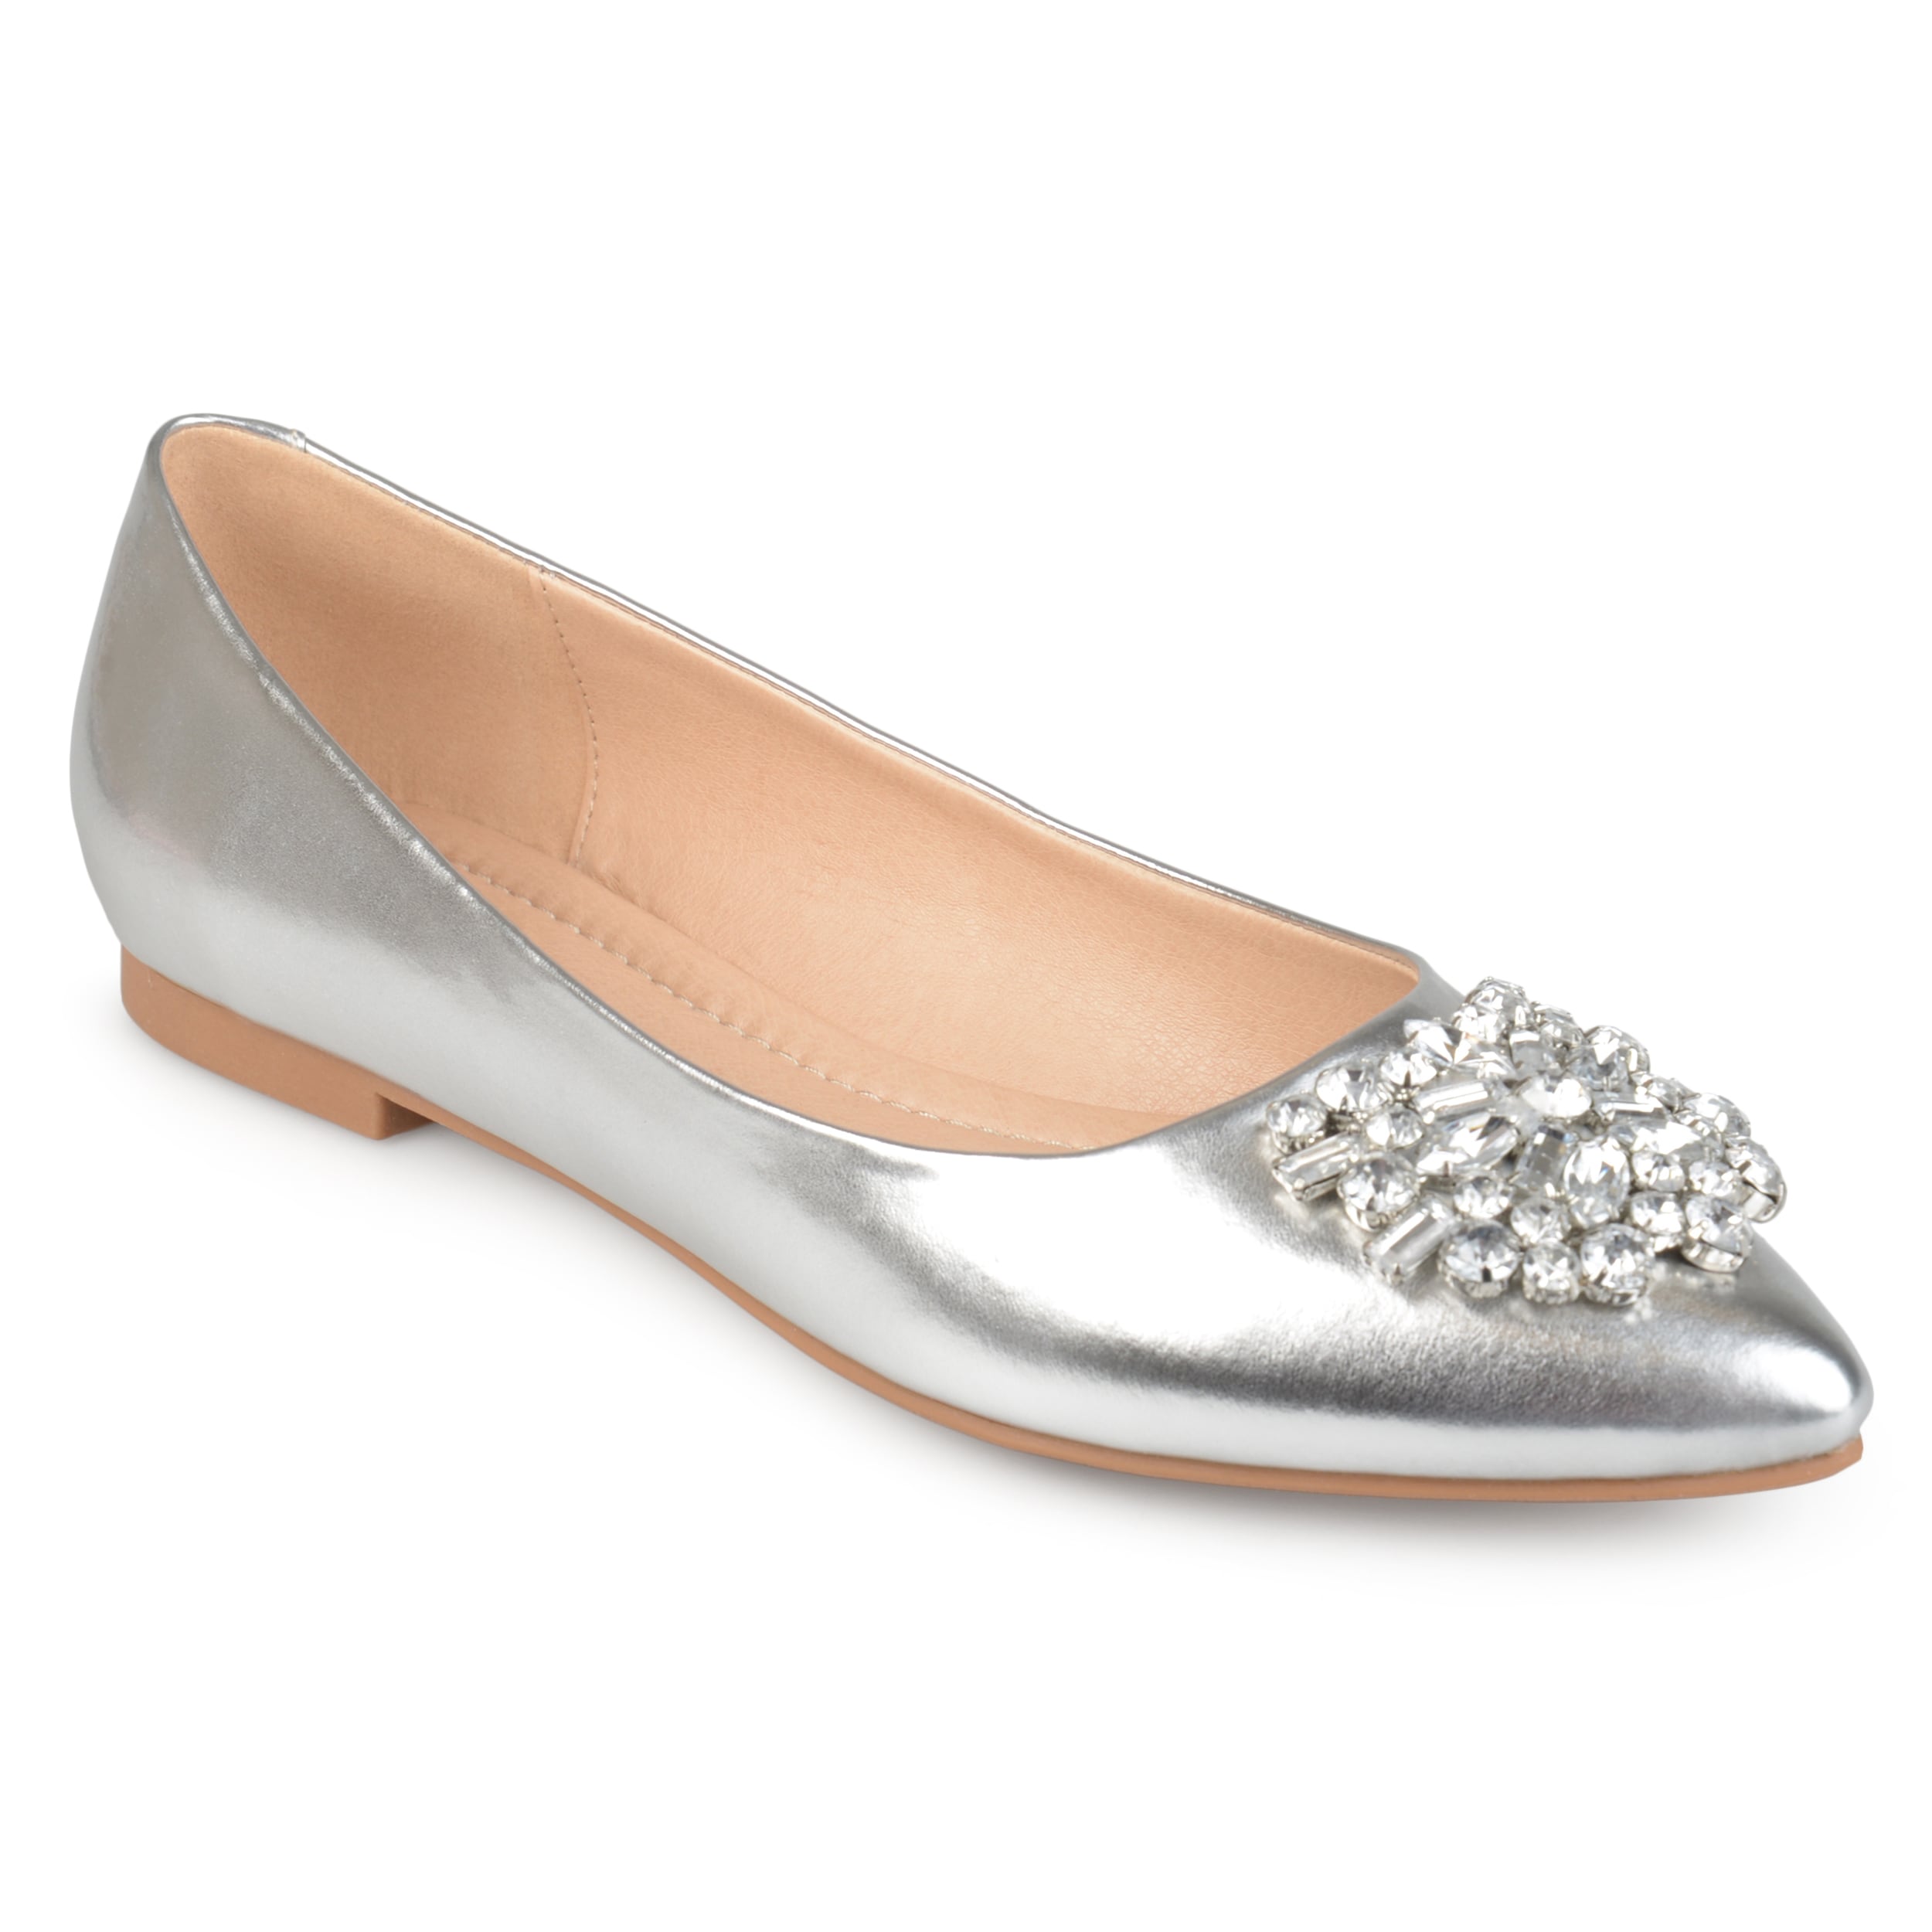 silver leather flats